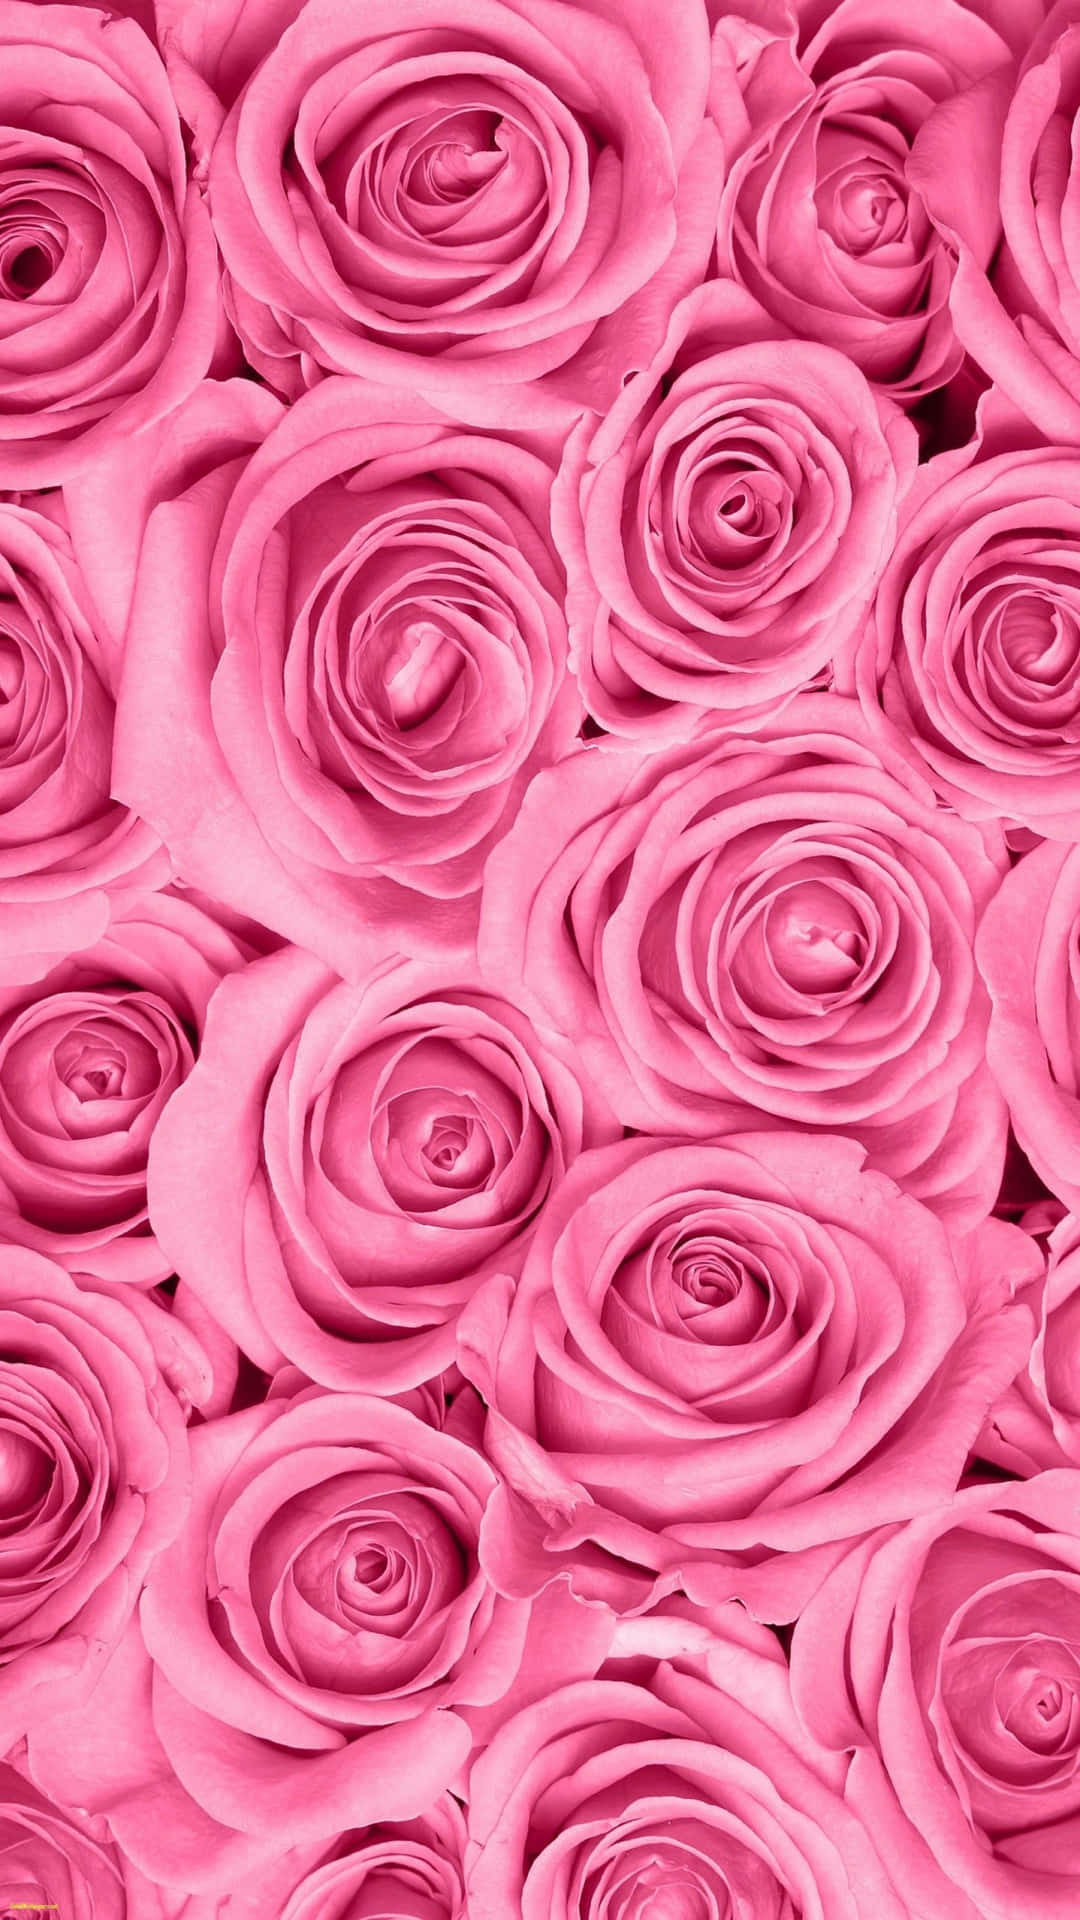 Vibrant Pink Roses Background